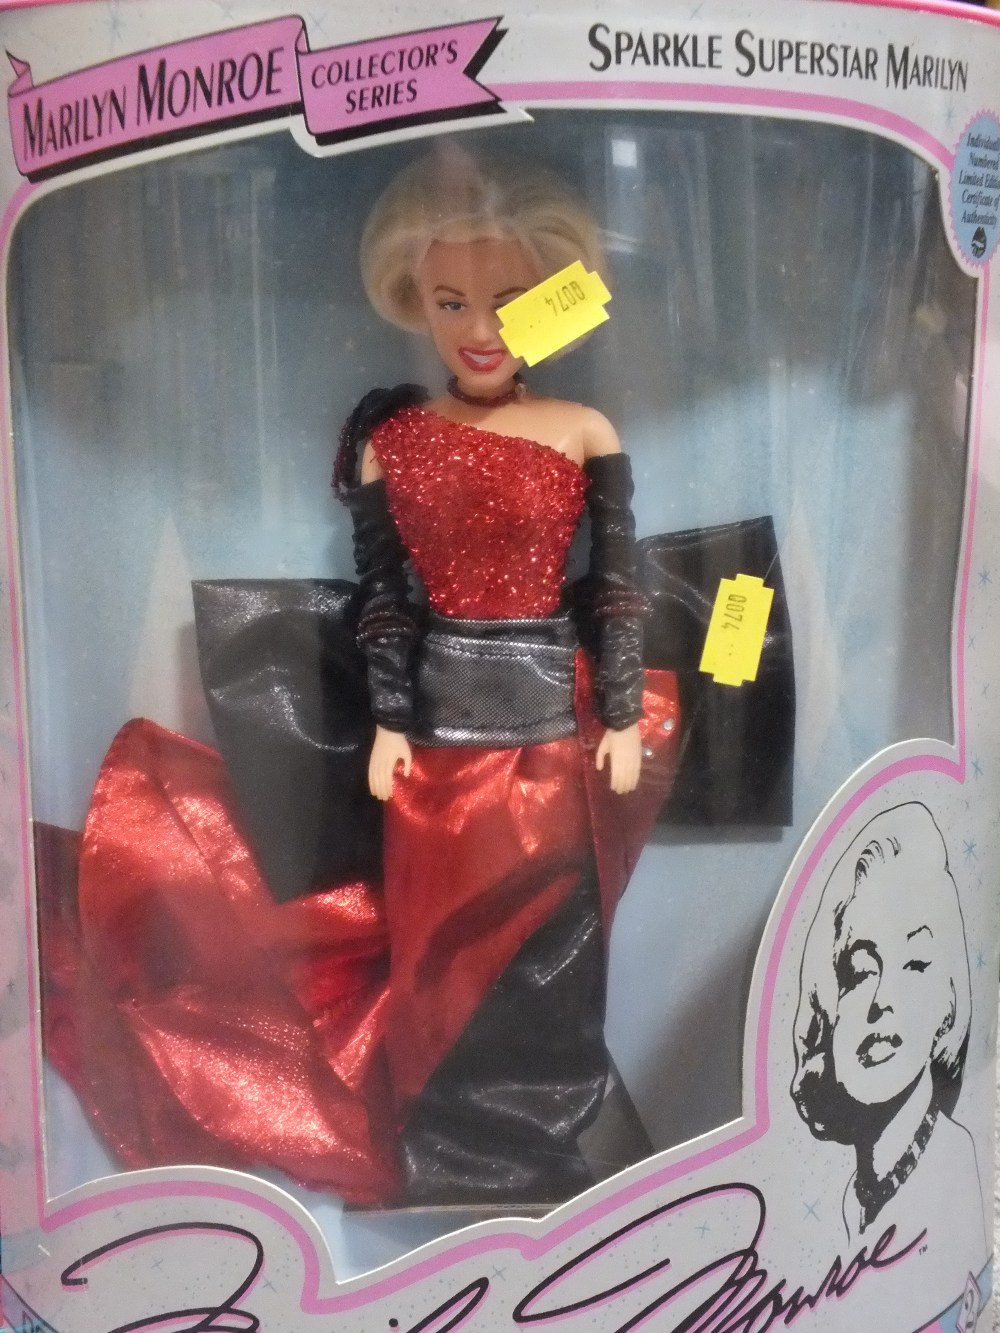 TWO BOXED MARILYN MONROE COLLECTORS SERIES DOLLS COMPRISING OF SPOTLIGHT SPLENDOUR MARILYN AND - Image 2 of 4